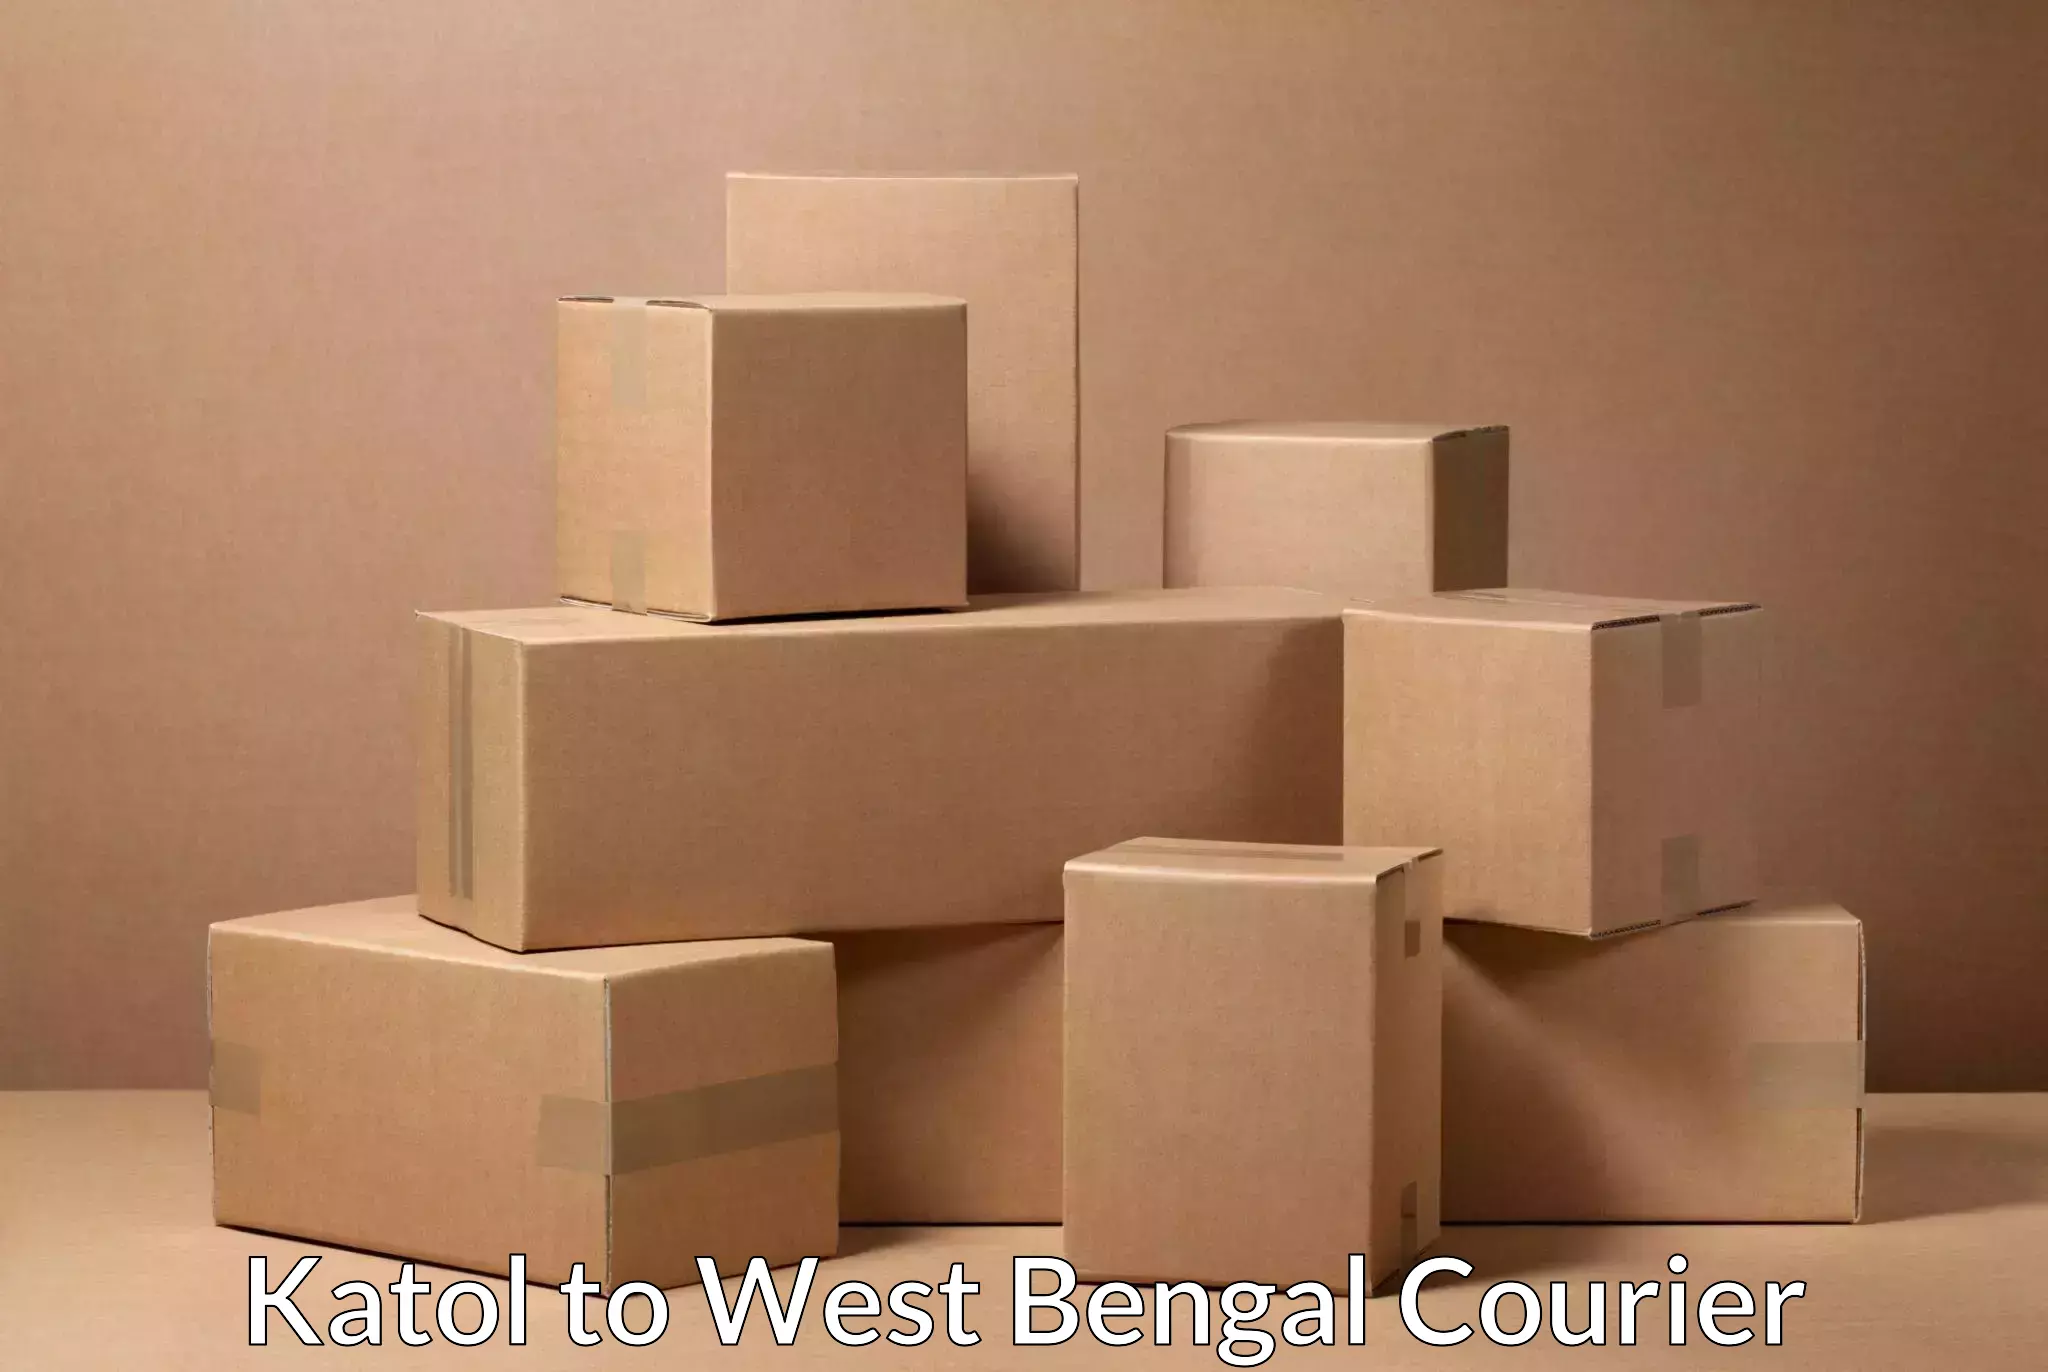 Package delivery network Katol to Durgapur